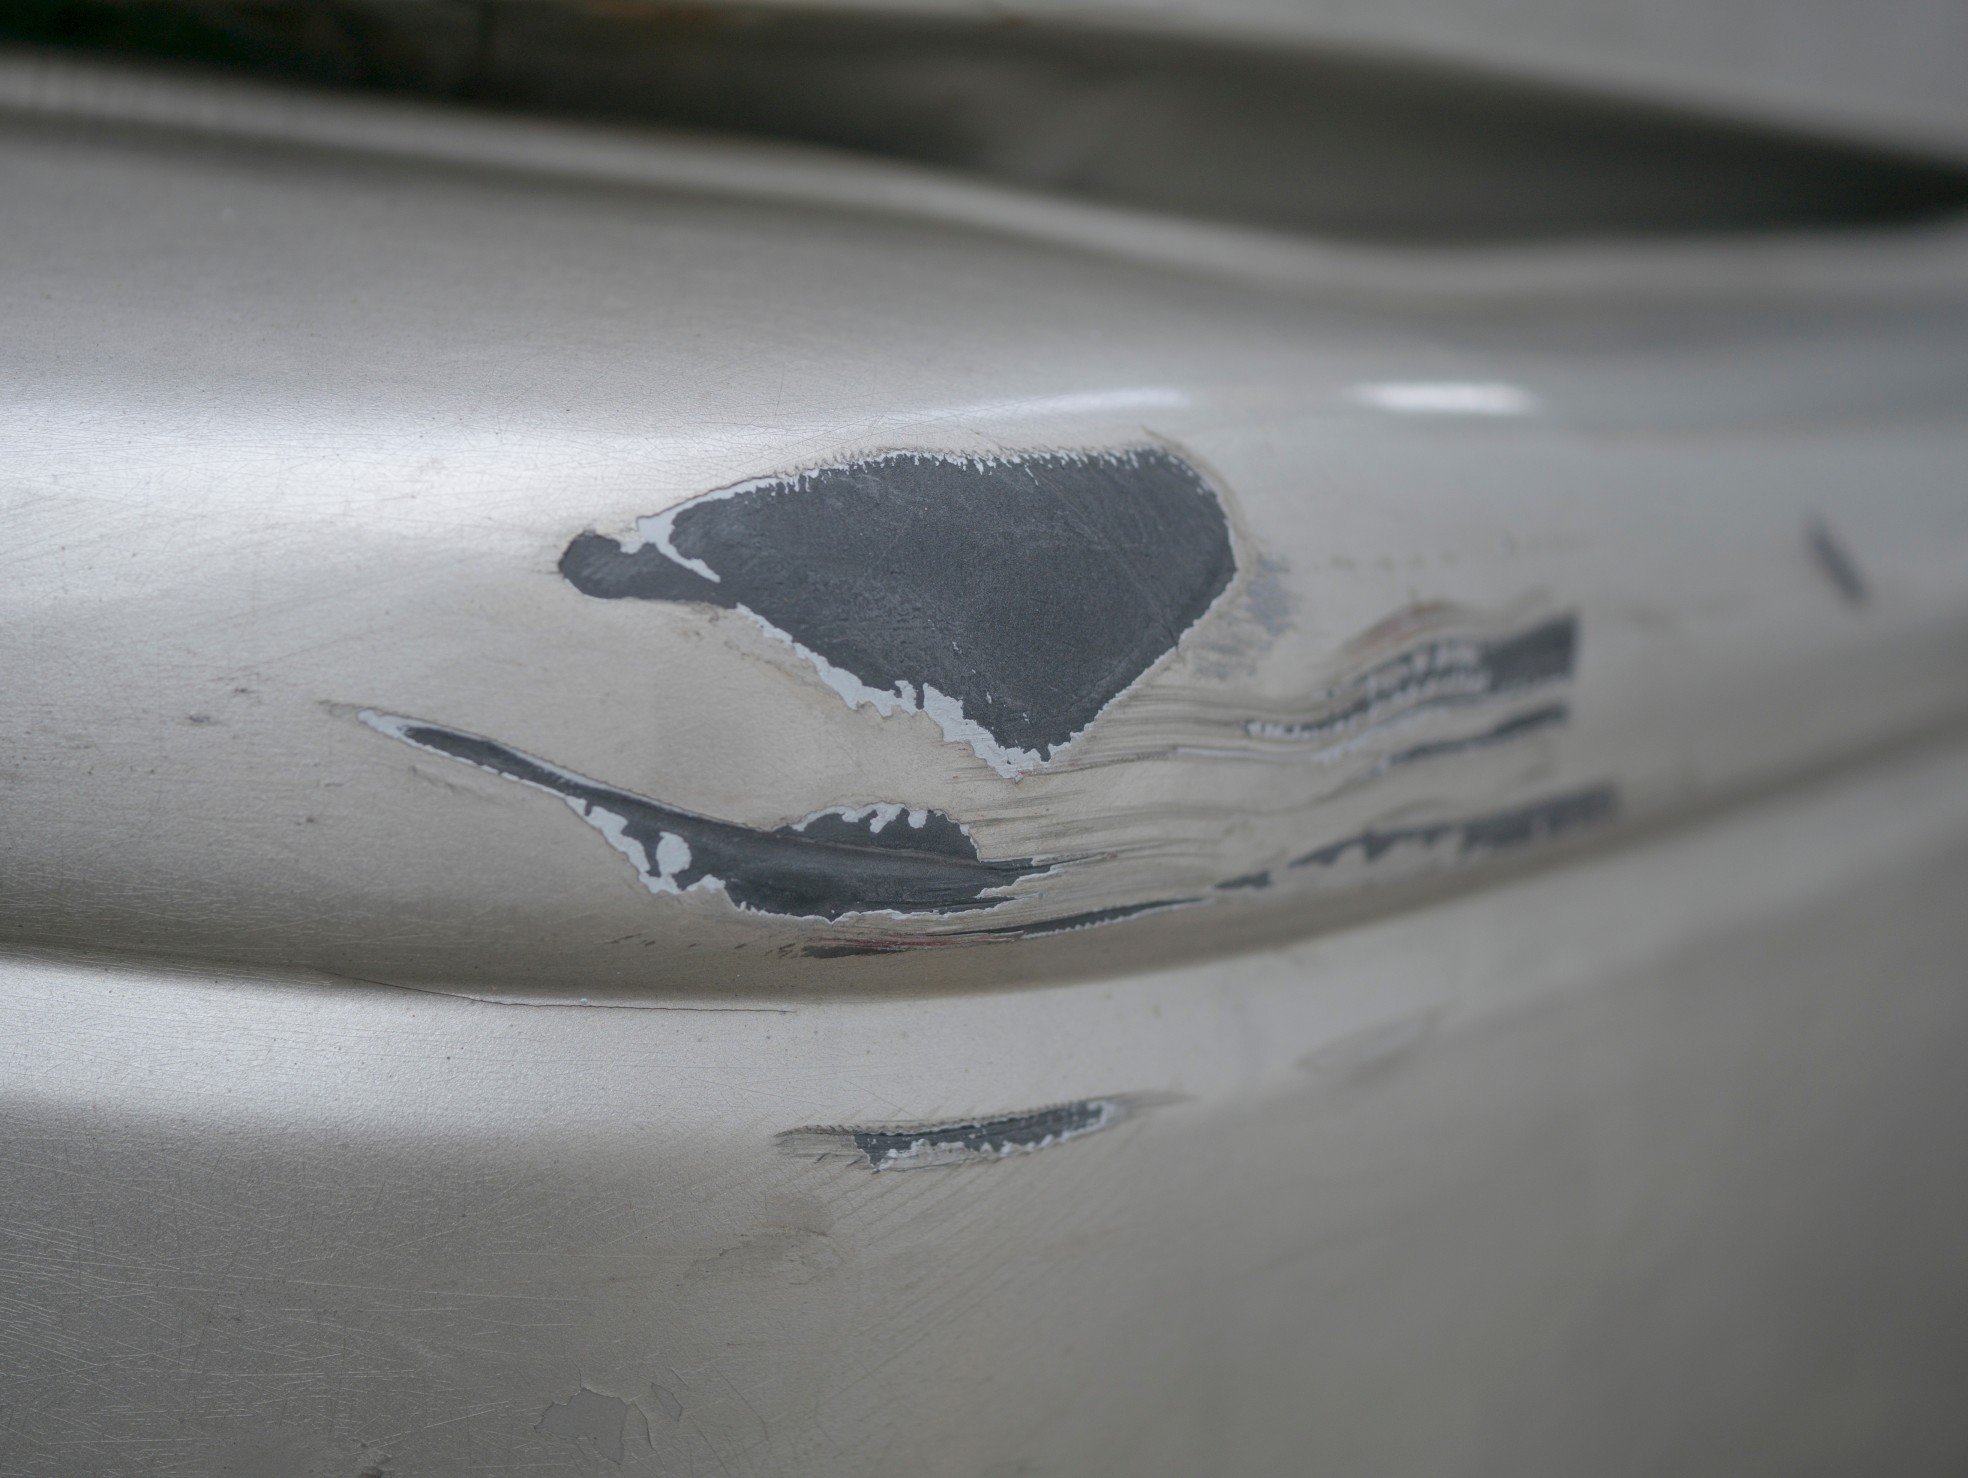 Step-by-Step Guide: How to Use Rubbing Compound for Car Scratches - DIY  Auto Restoration